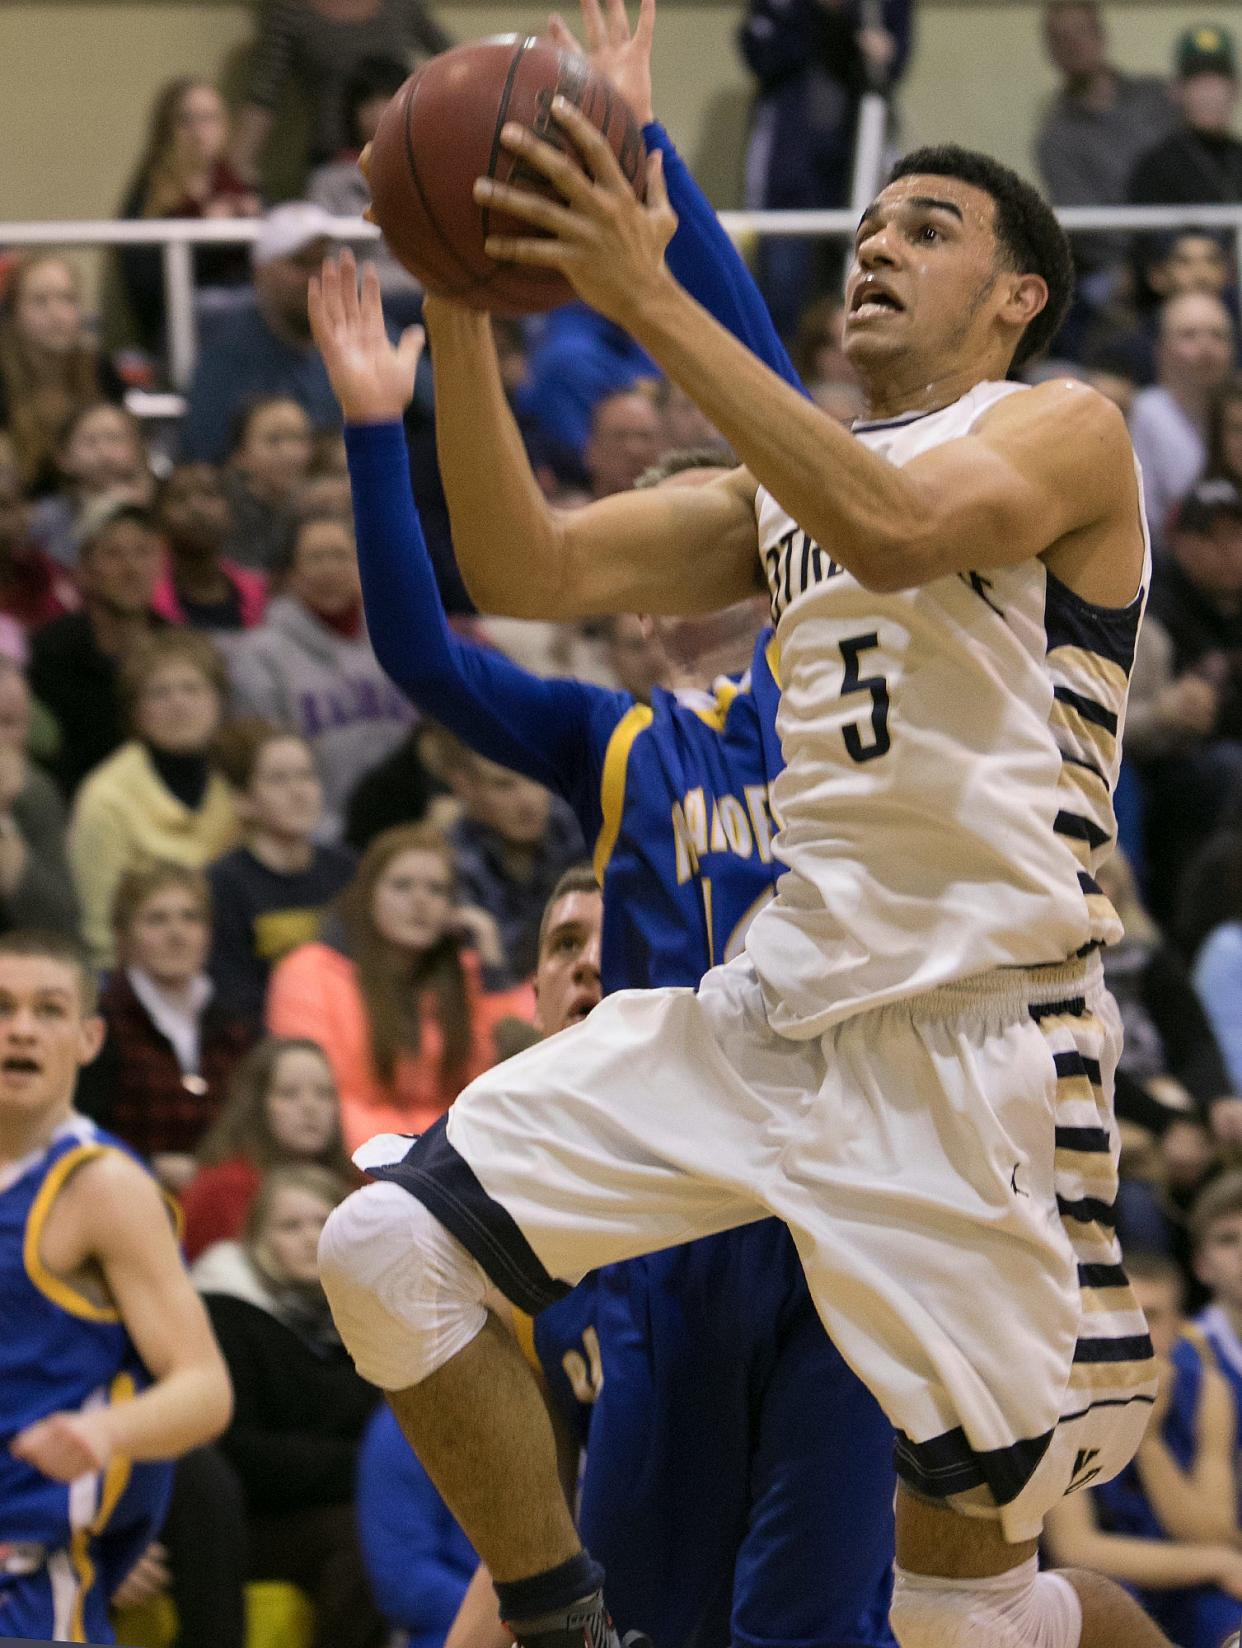 Senior point guard Darius Garvin, shown against Trumansburg in a sectional quarterfinal victory, averaged 24.9 points, 11 rebounds, 5 assists and 4.5 steals to lead the Crusaders to a 15-5 record.